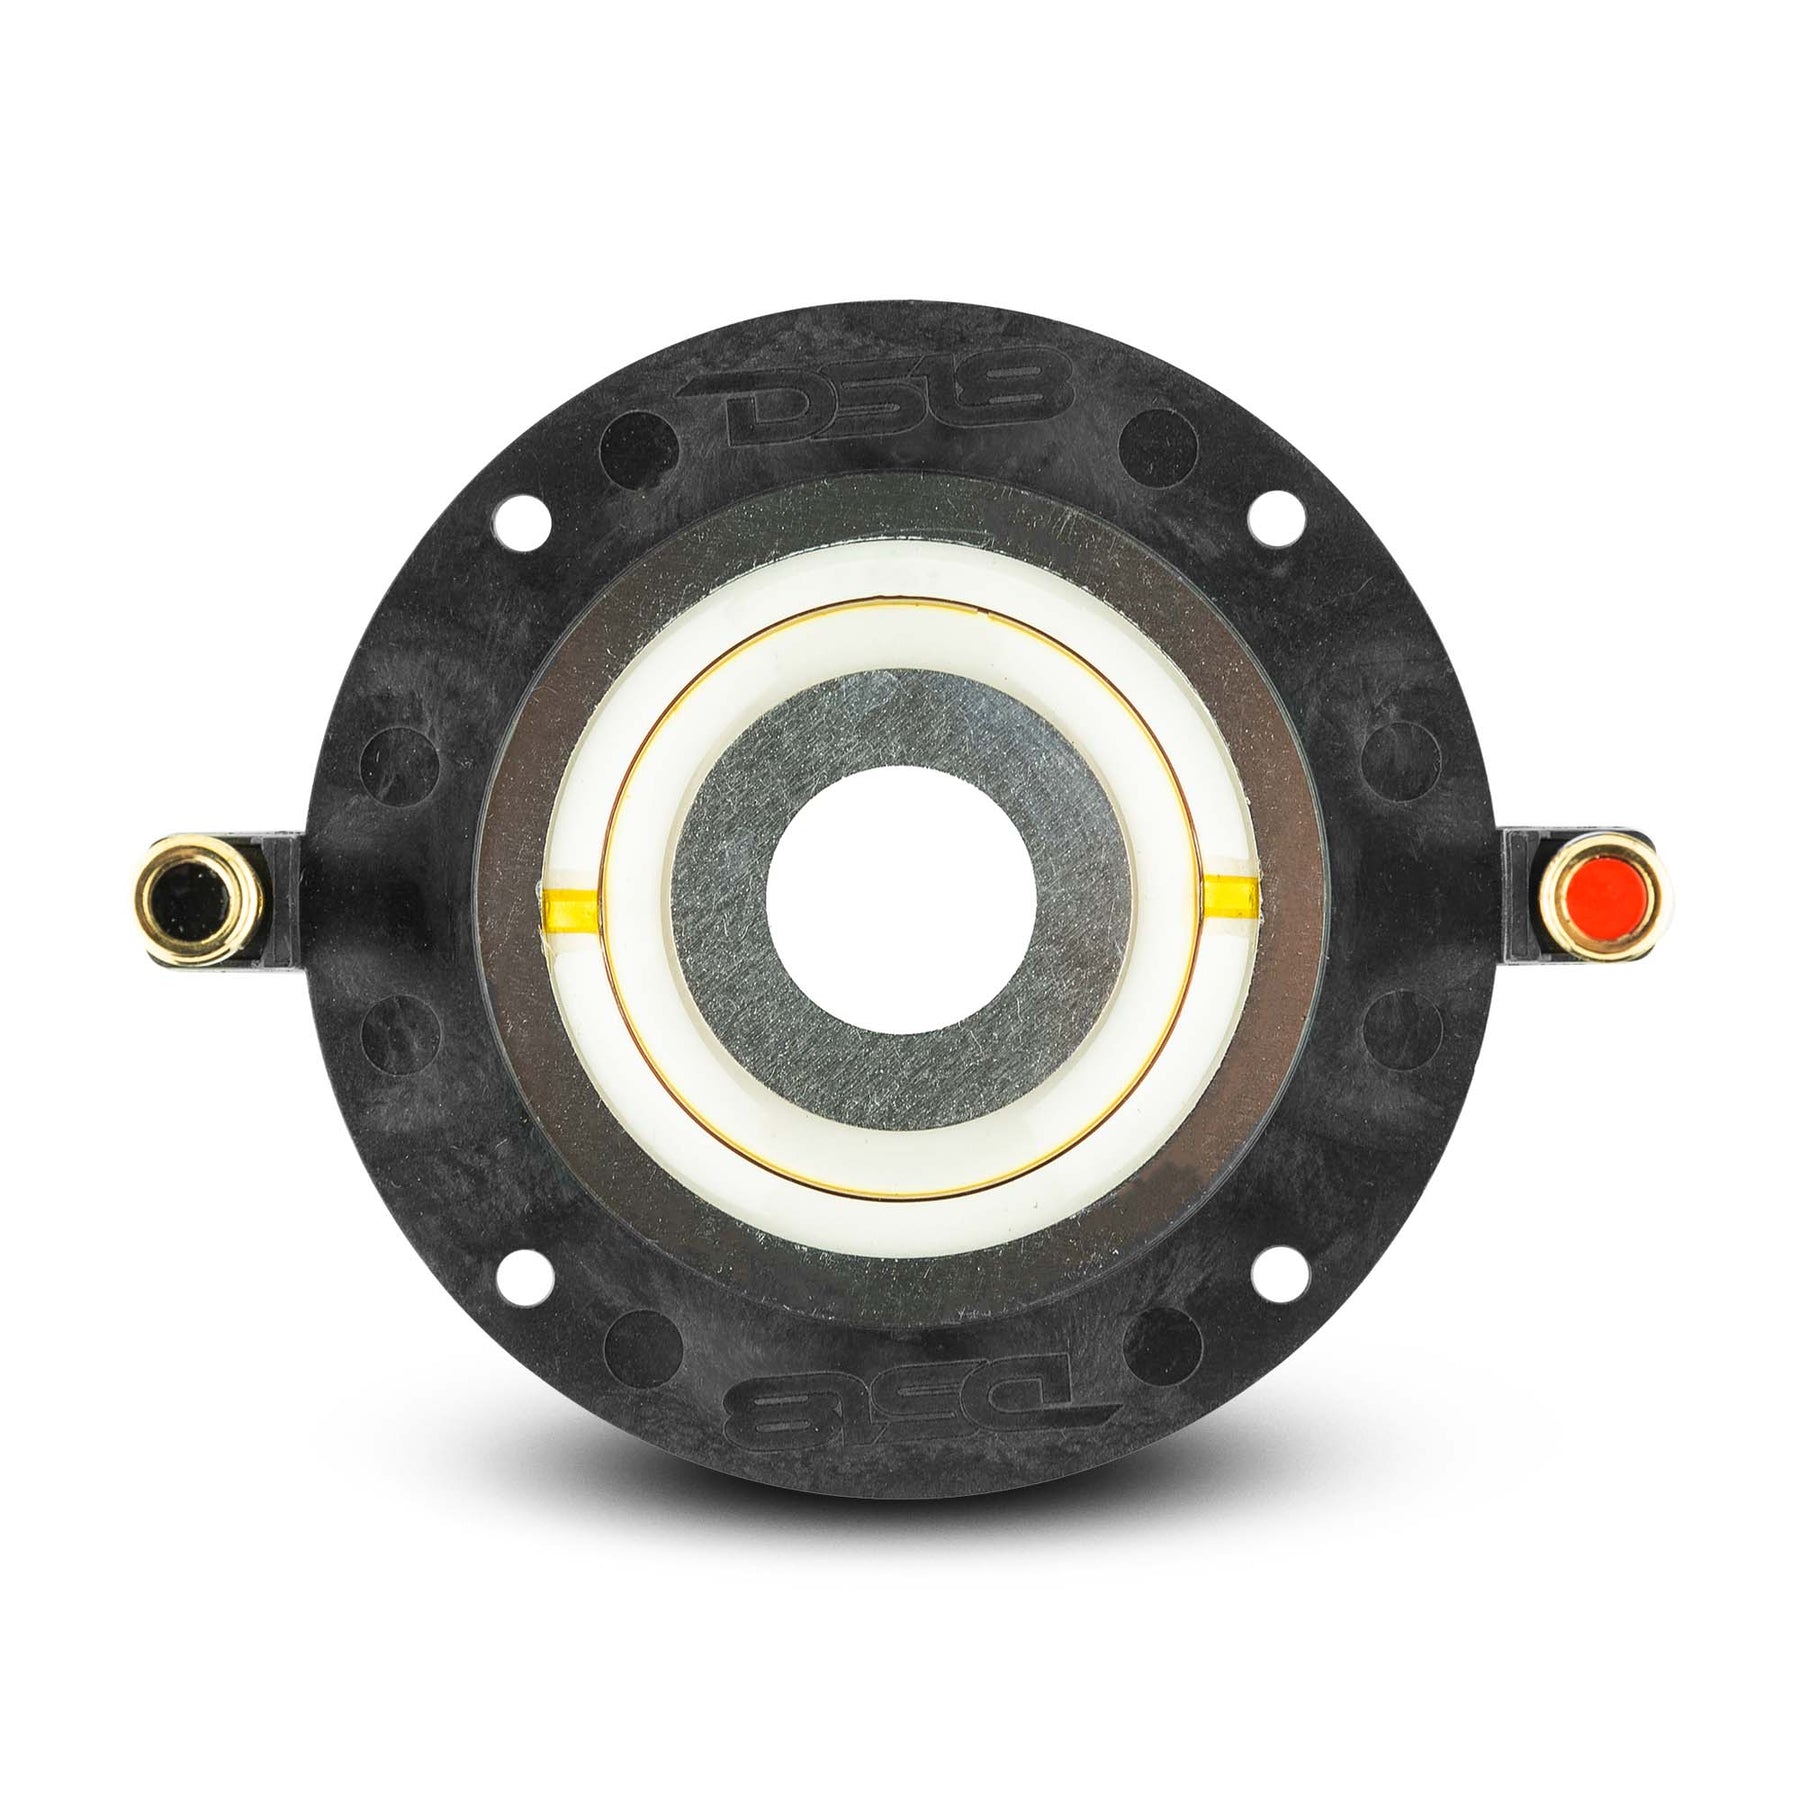 PRO 3.5" Polymer Replacement Diaphragm for PRO-DRNCOAXVC and Universal 8-Ohm